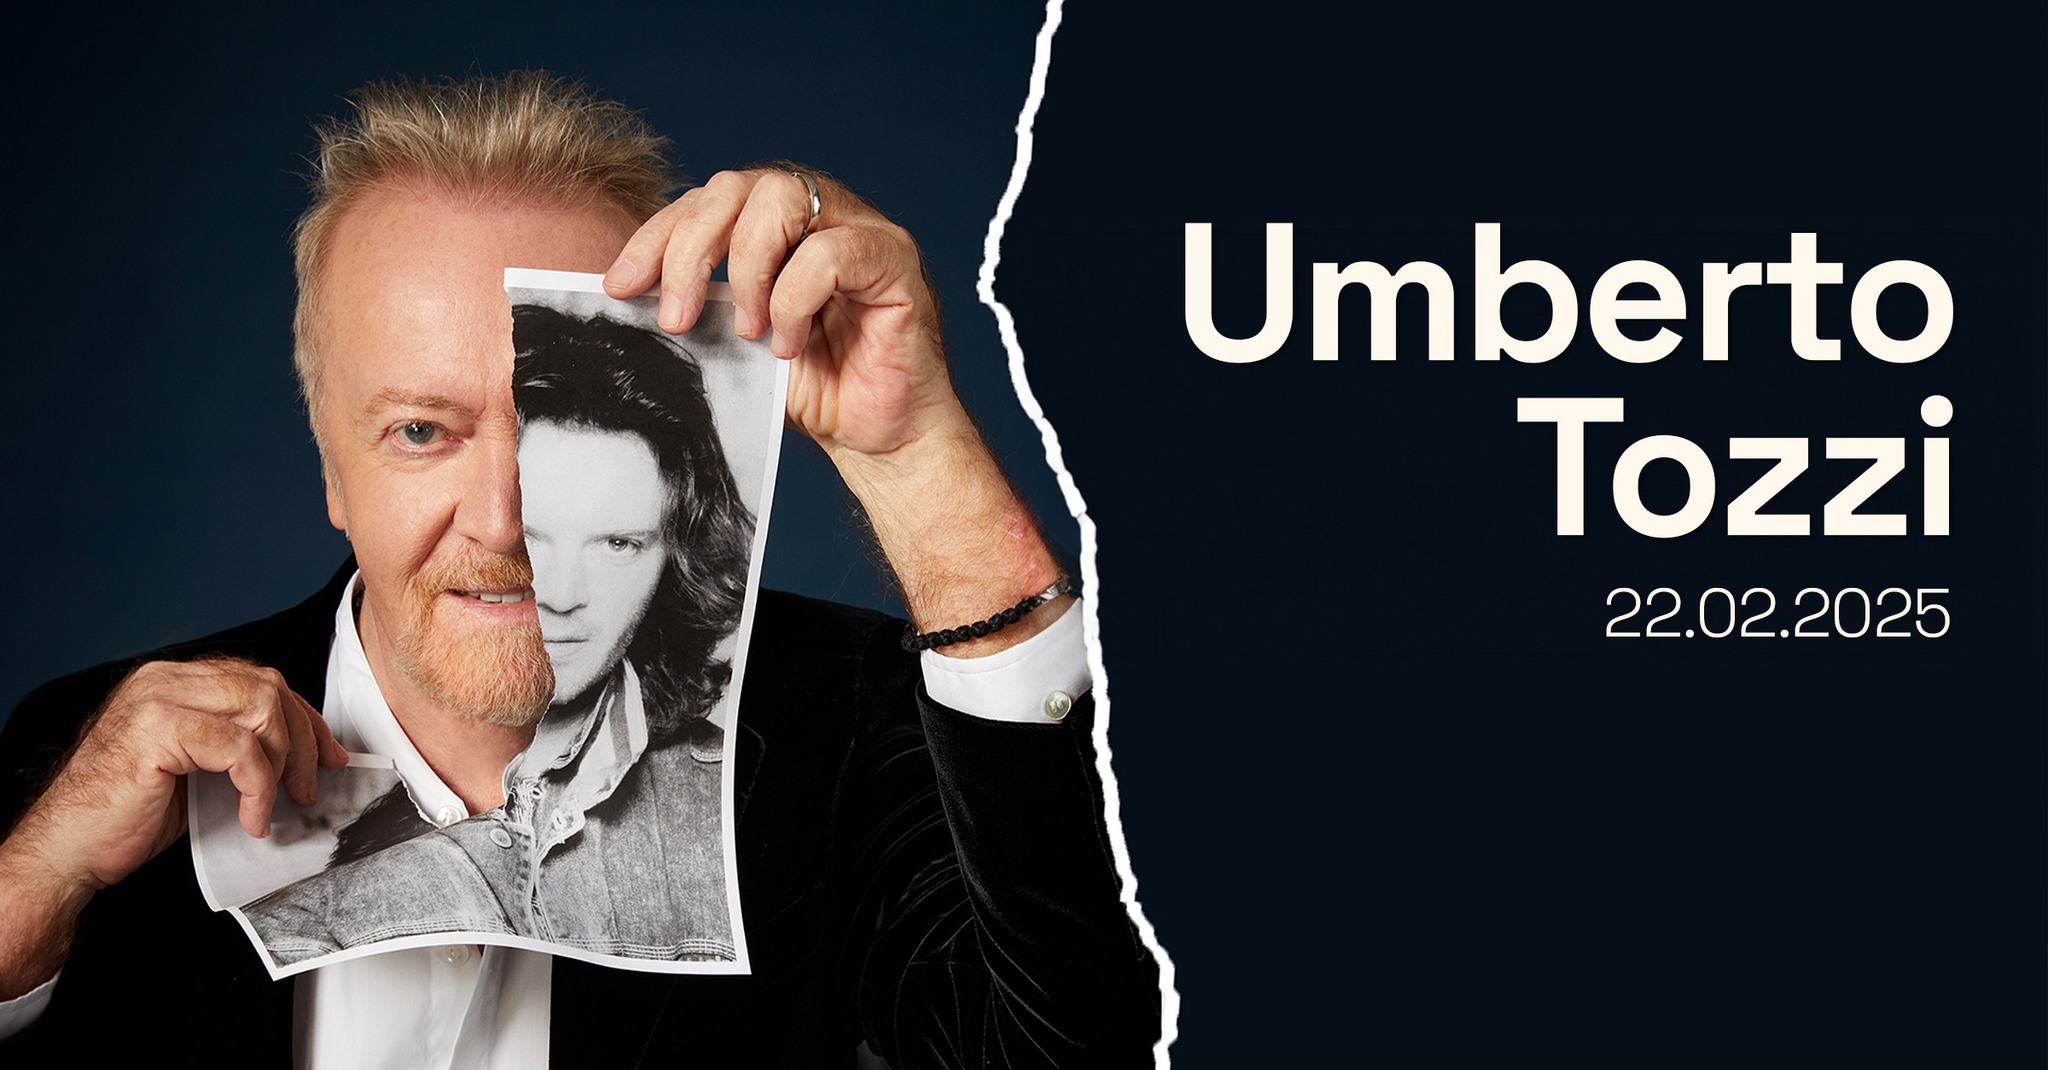 Umberto Tozzi at Forest National Tickets